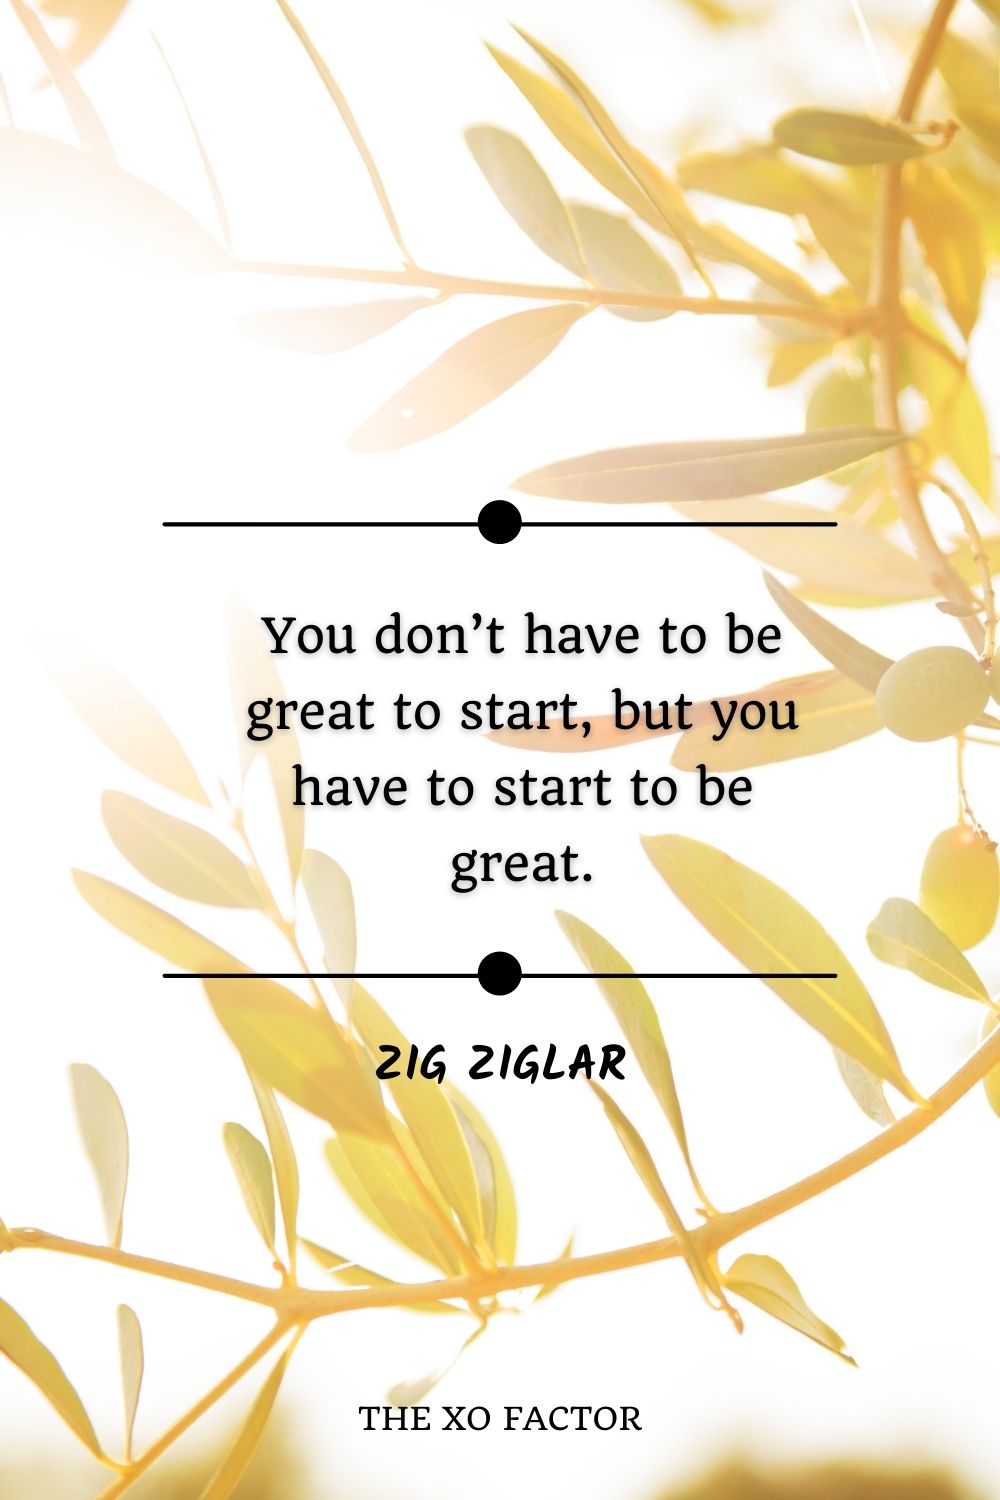 You don’t have to be great to start, but you have to start to be great.” – Zig Ziglar